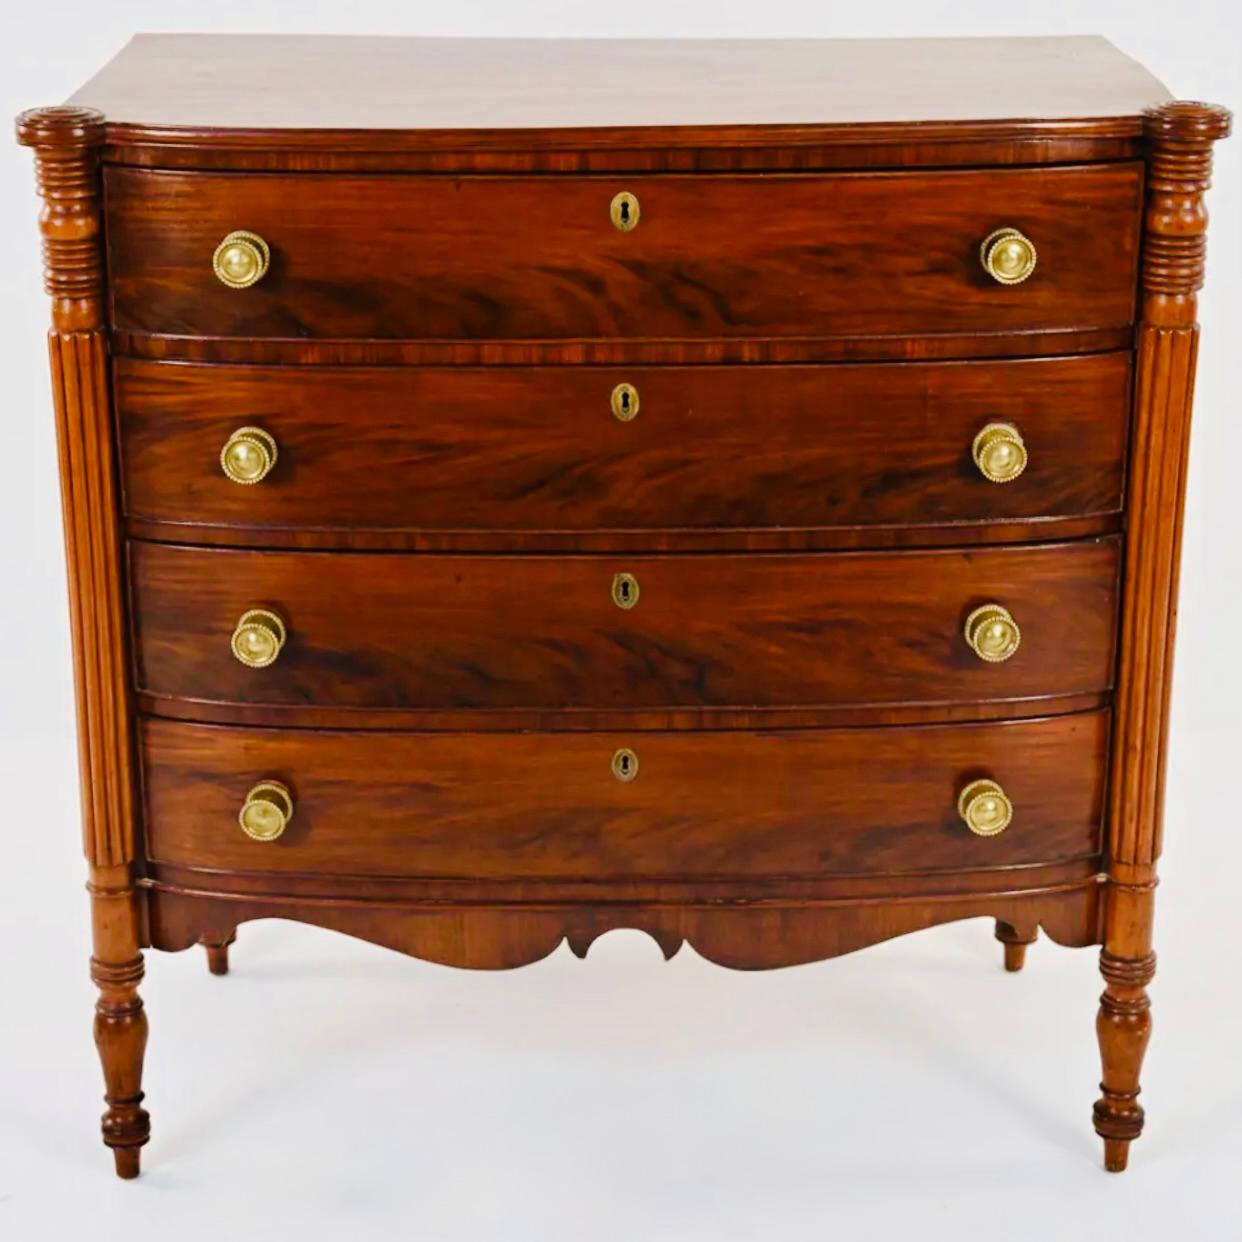 Hand-Carved Fine American Federal Mahogany Chest Of Drawers, Massachusetts, Ca. 1810